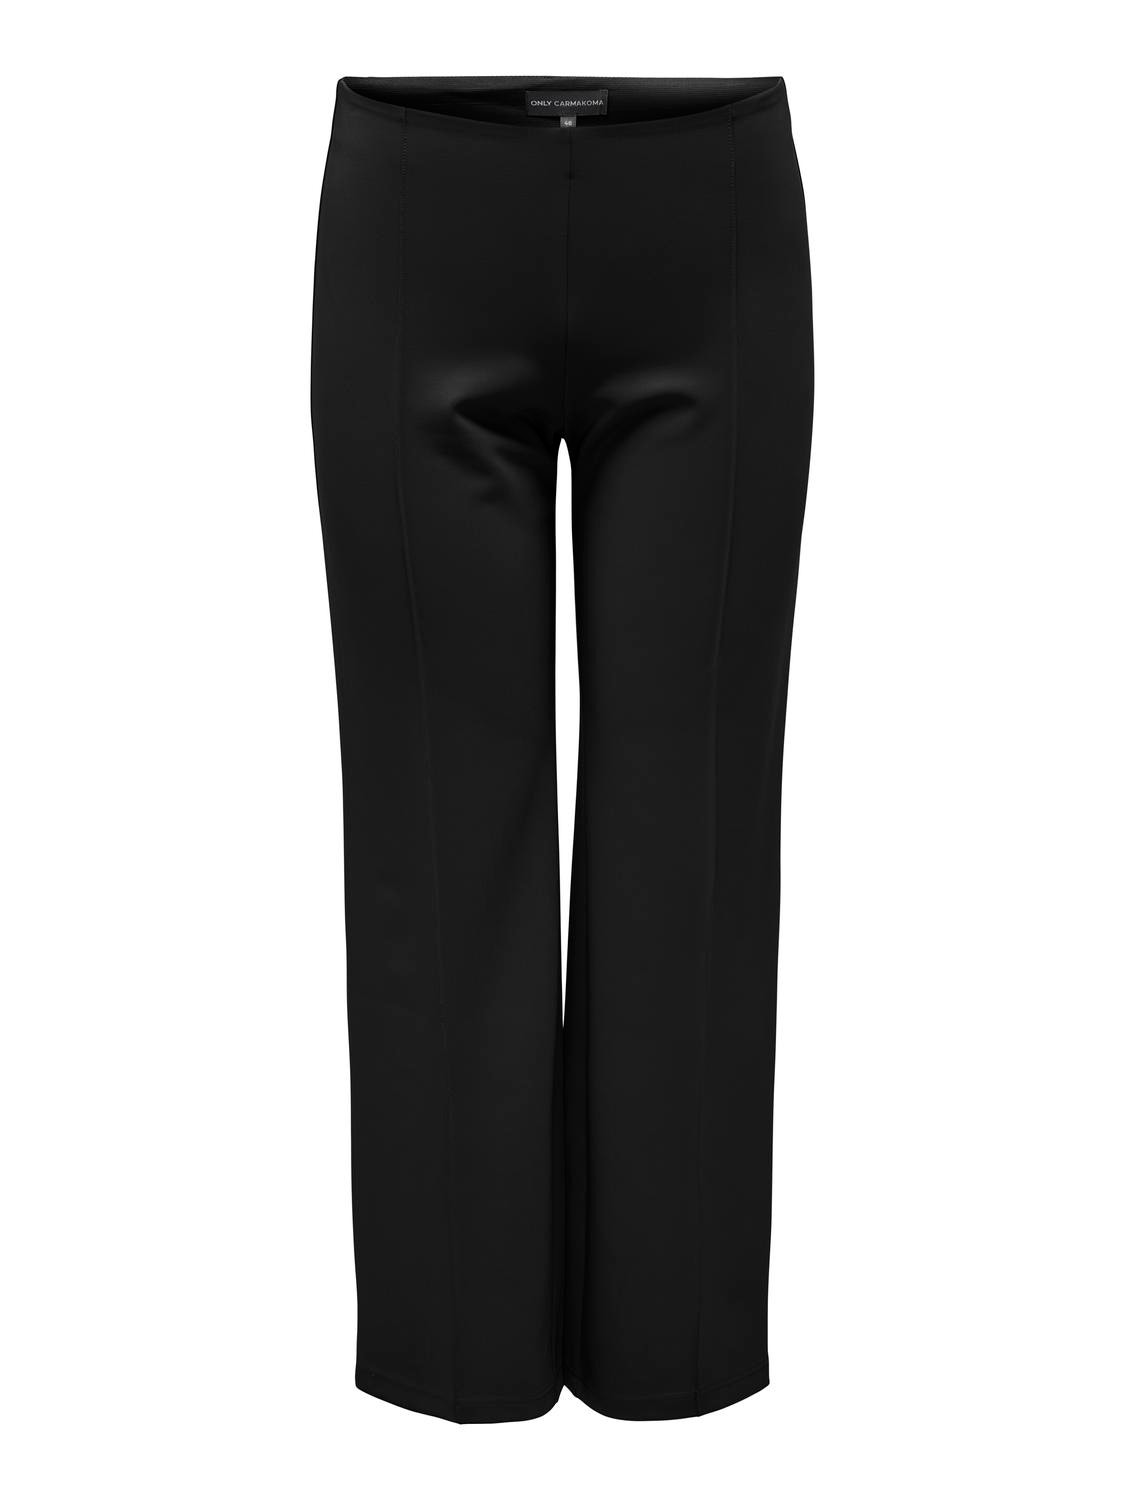 ONLY Gerade geschnitten Hohe Taille Curve Hose -Black - 15312009